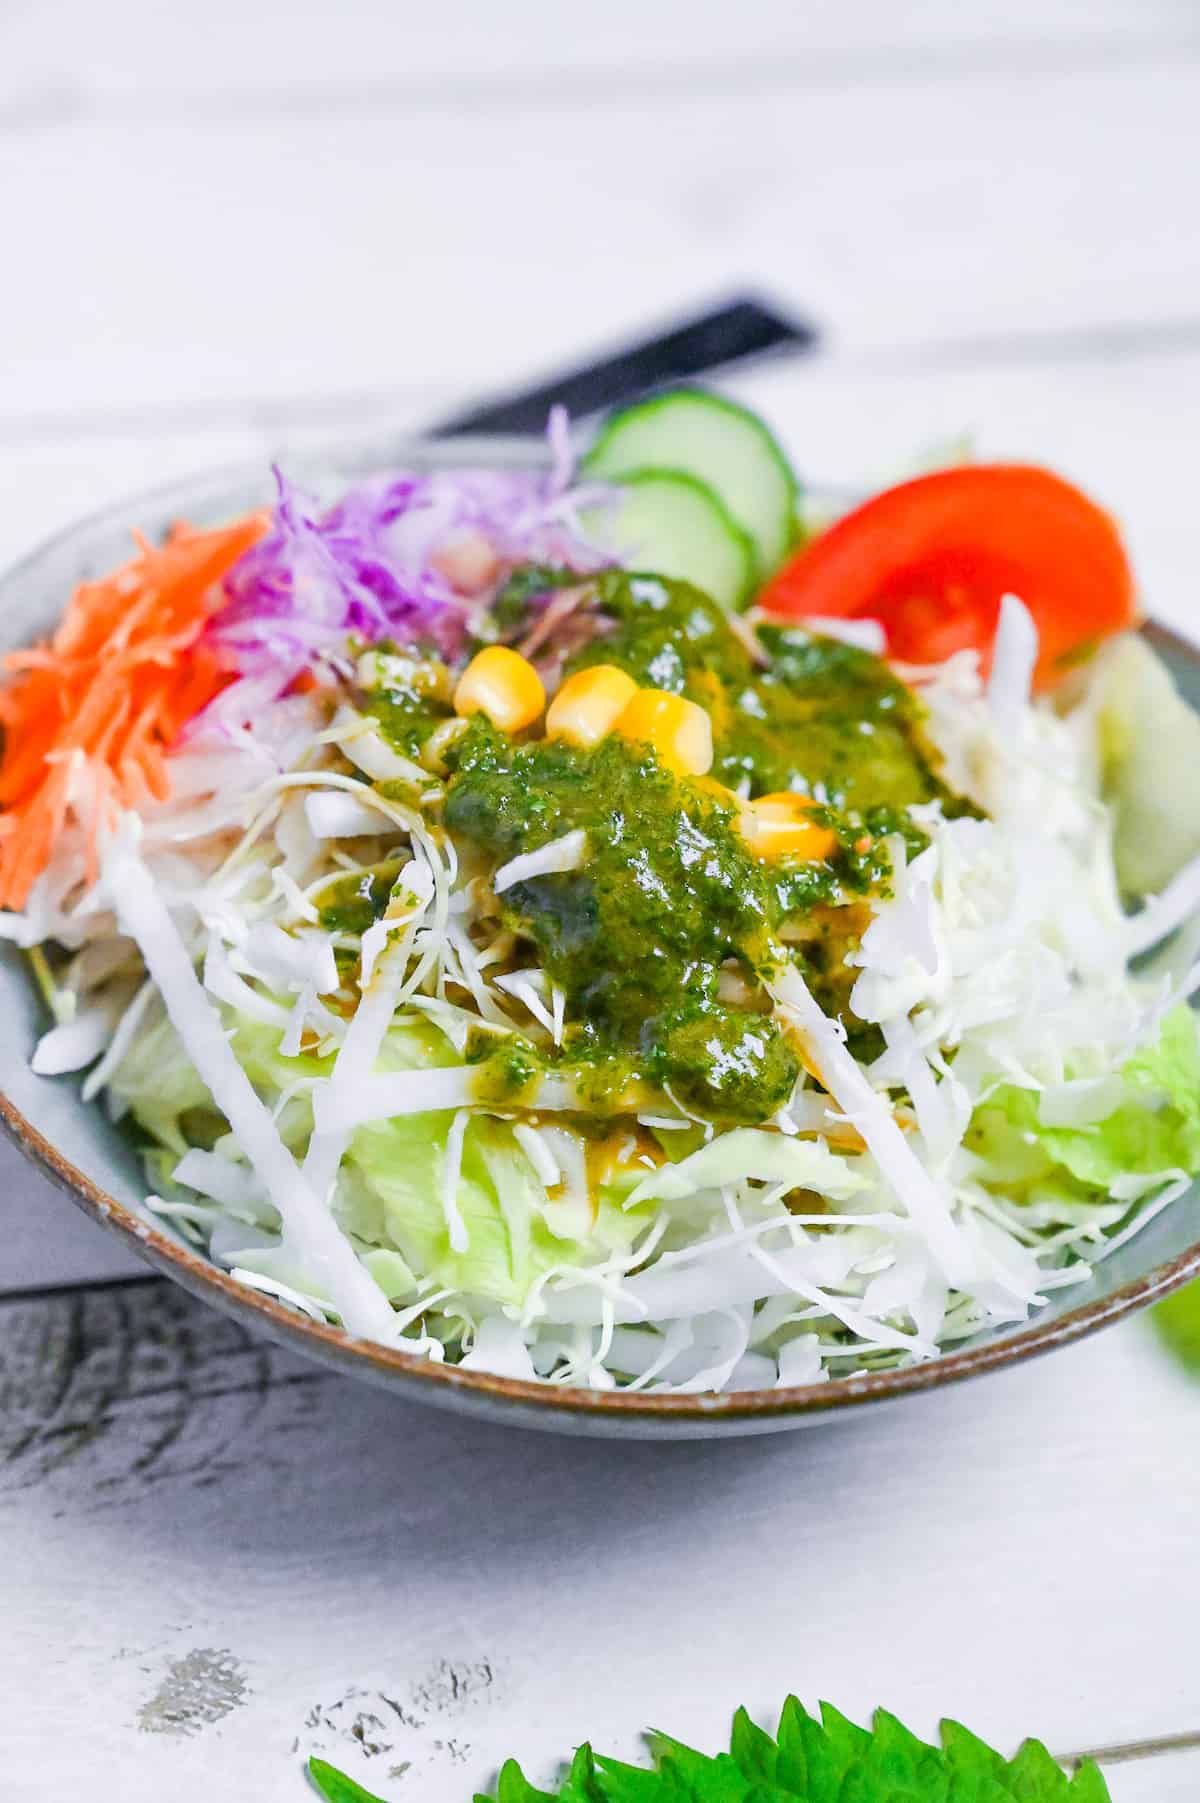 Japanese shiso dressing over a mixed salad of crunchy lettuce, carrots, cucumber, tomato and sweet corn